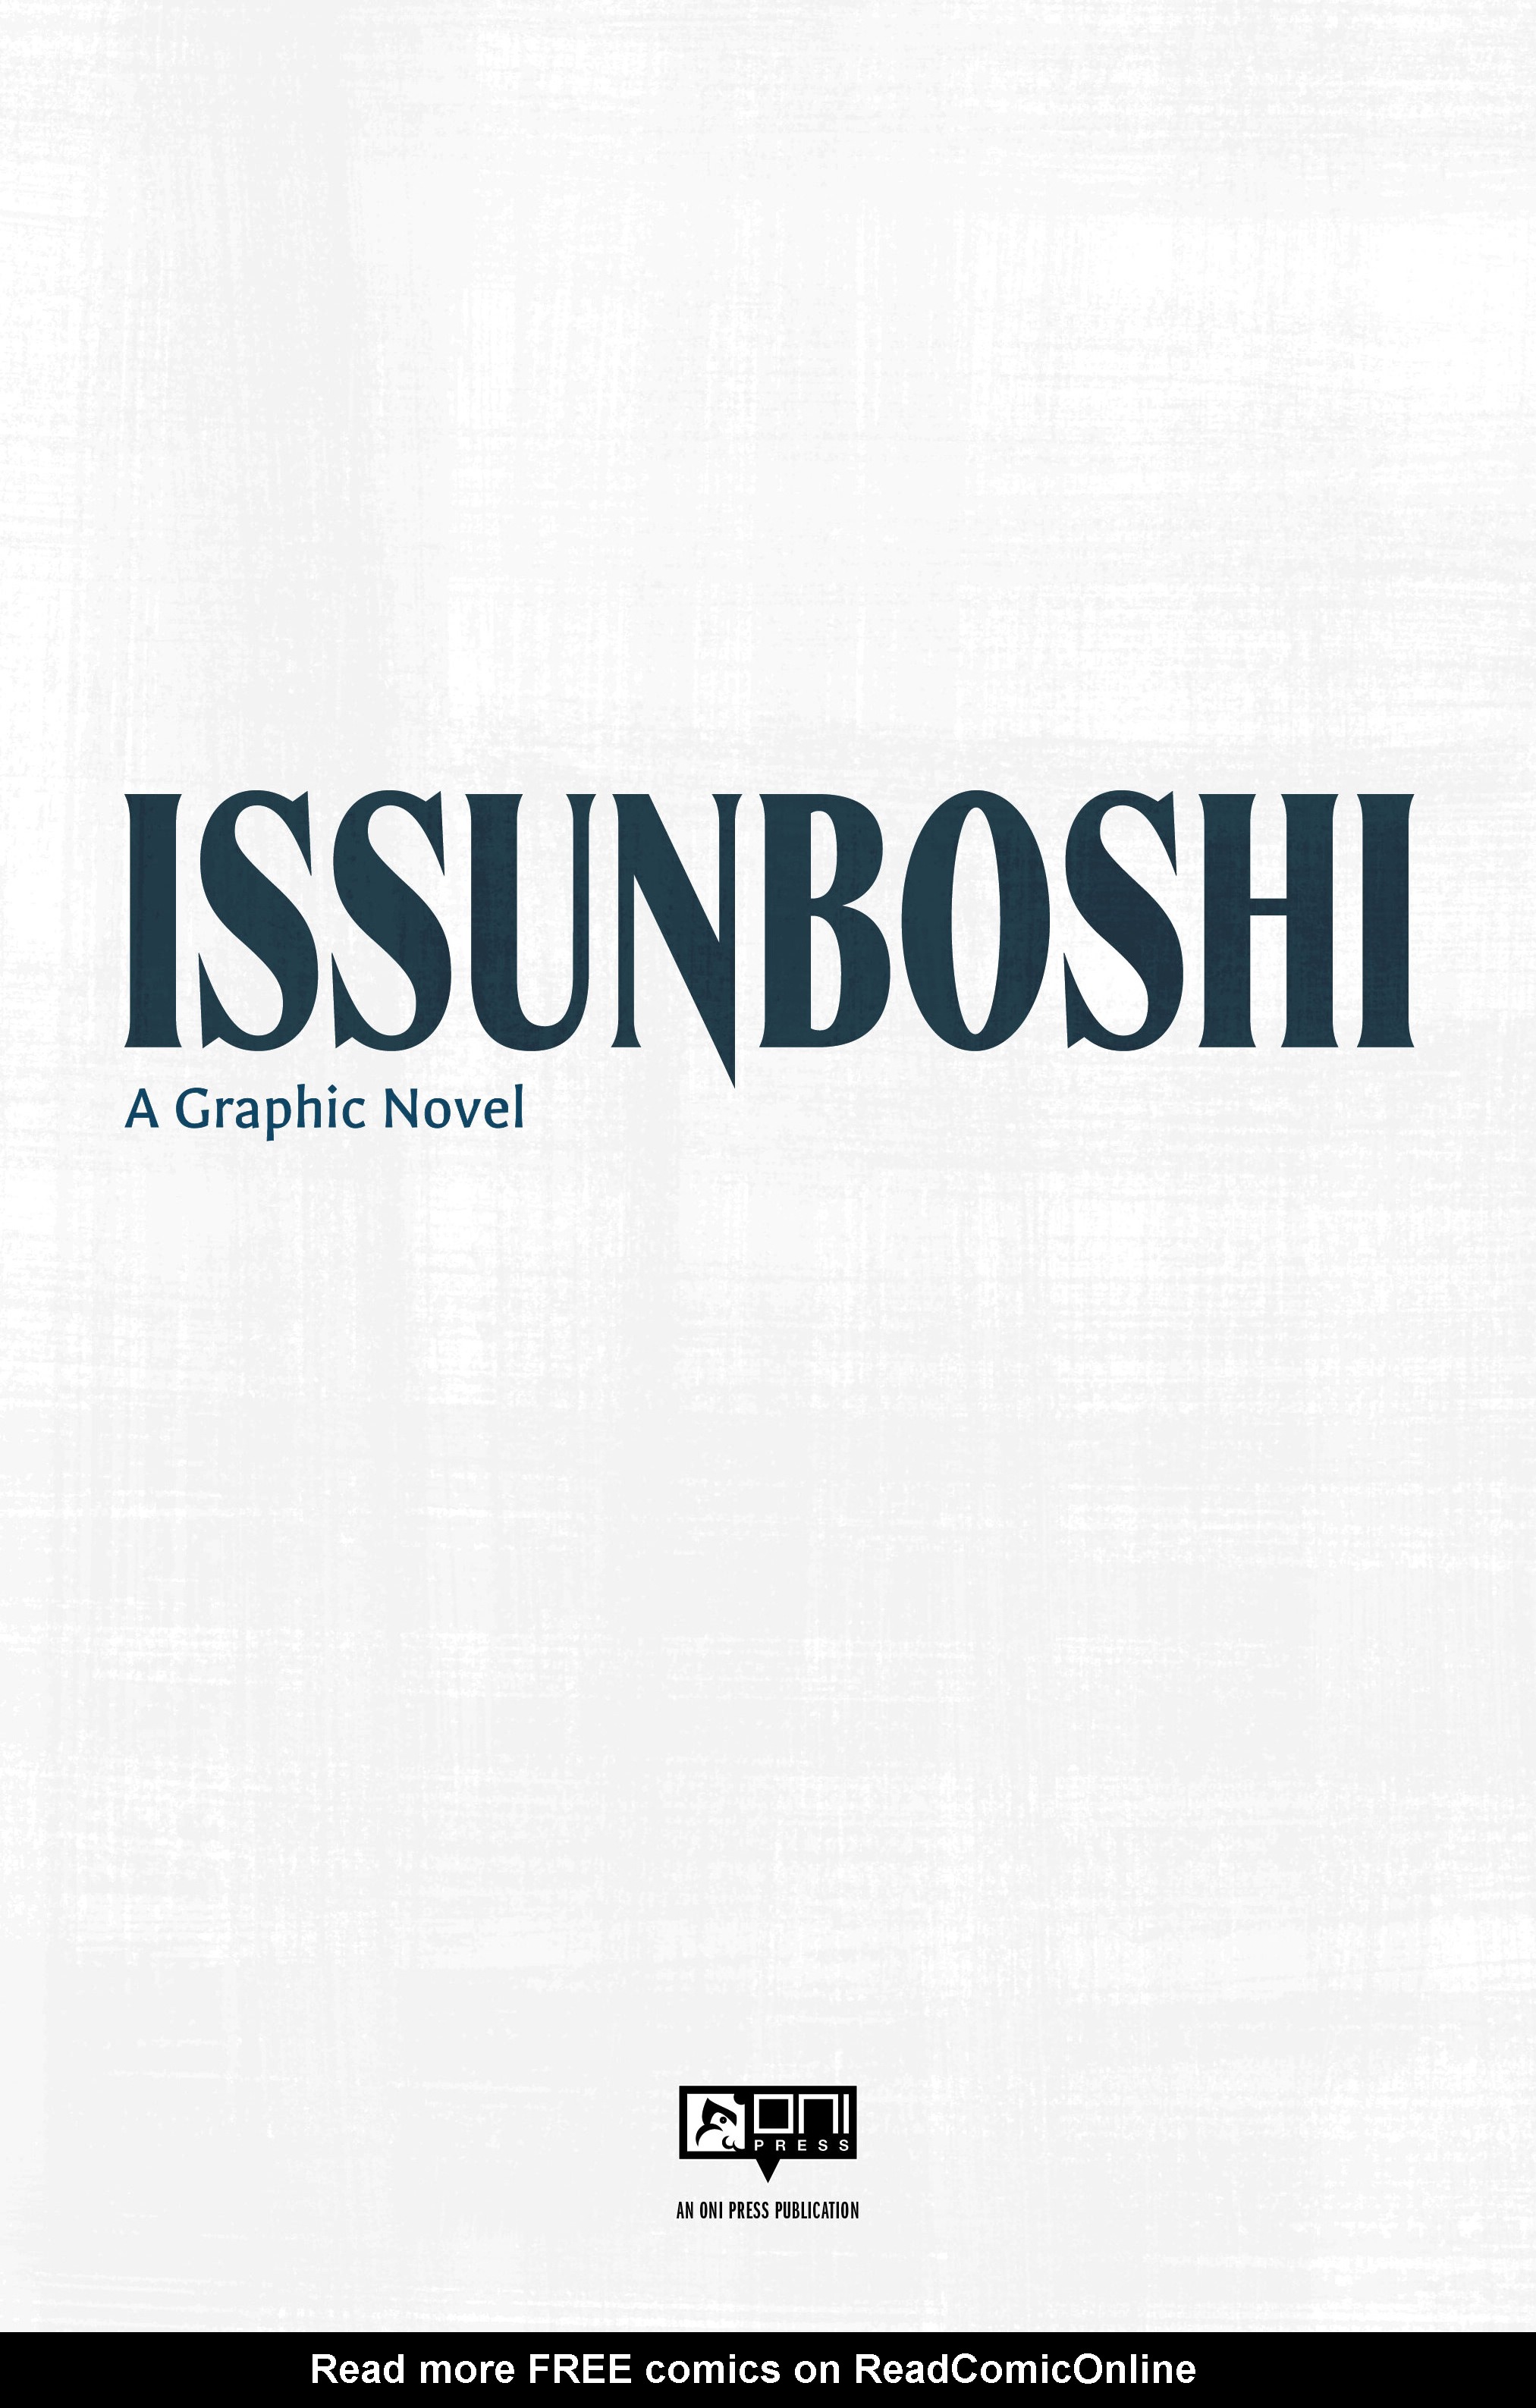 Read online Issunboshi: A Graphic Novel comic -  Issue # TPB (Part 1) - 2